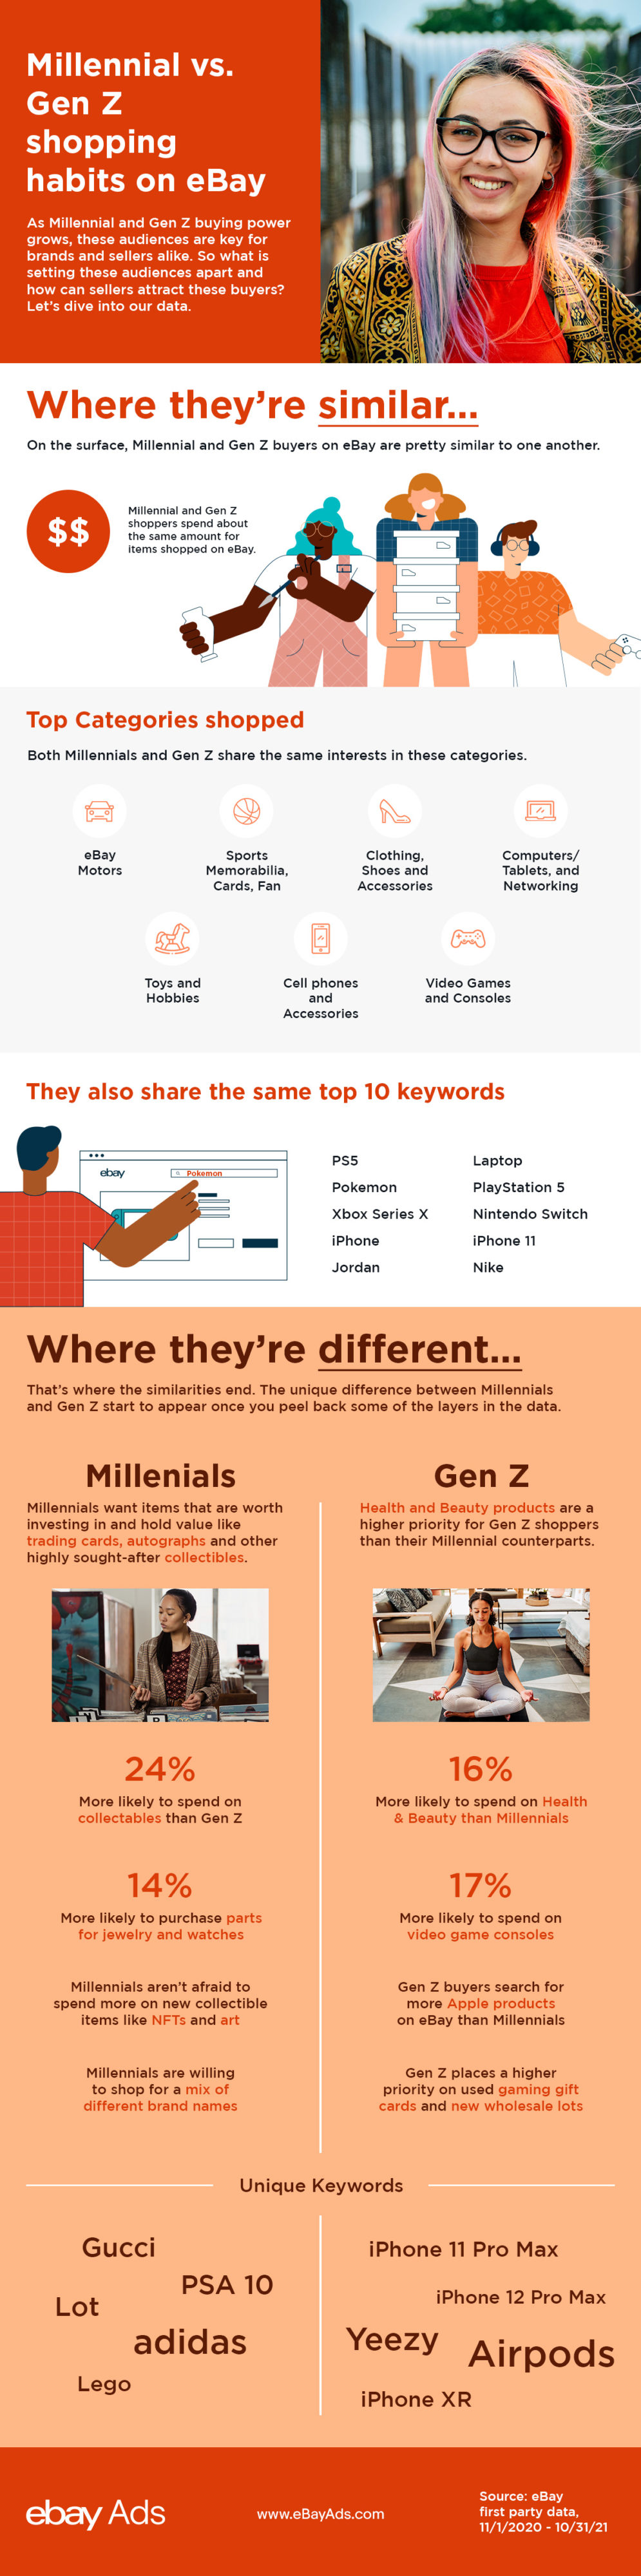 Infographic explaining the similarities and differences between Millennial and Gen Z shoppers.